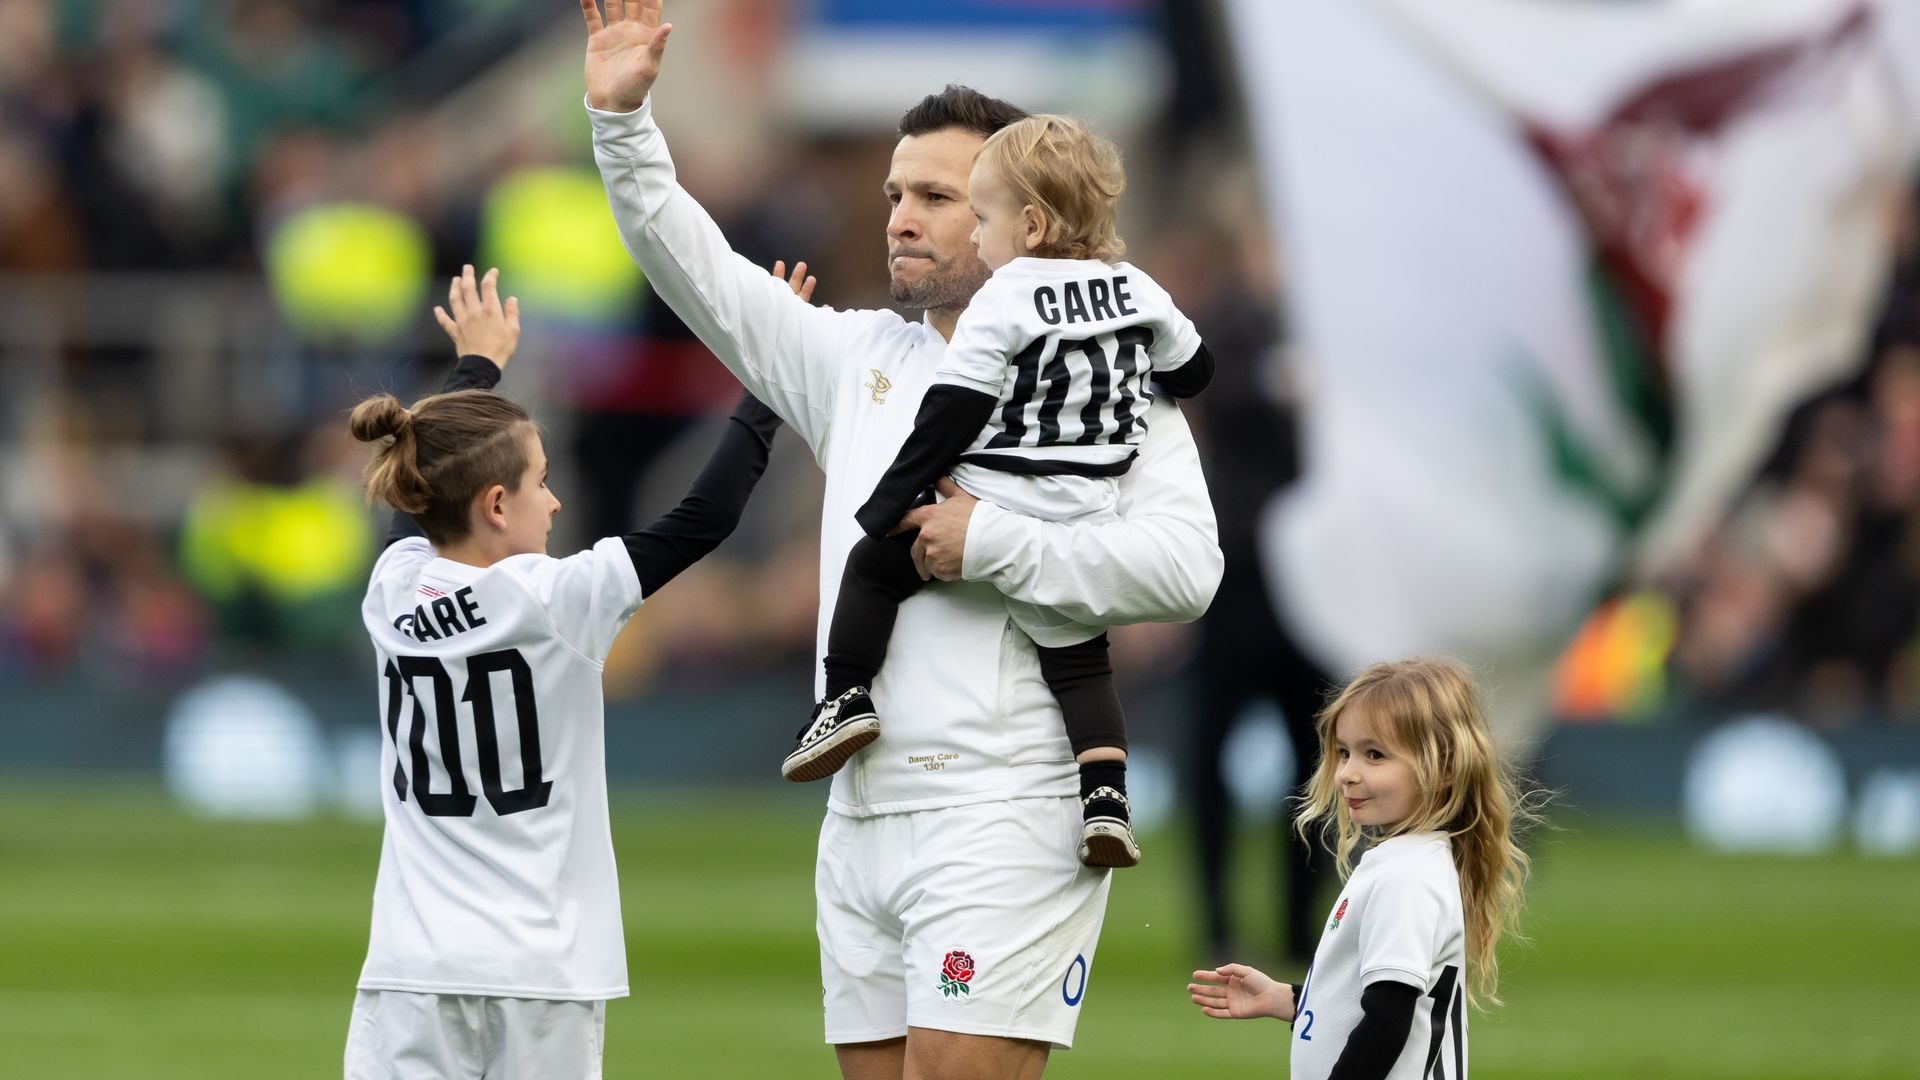 Danny Care with his children wave to the fans on his 100th match